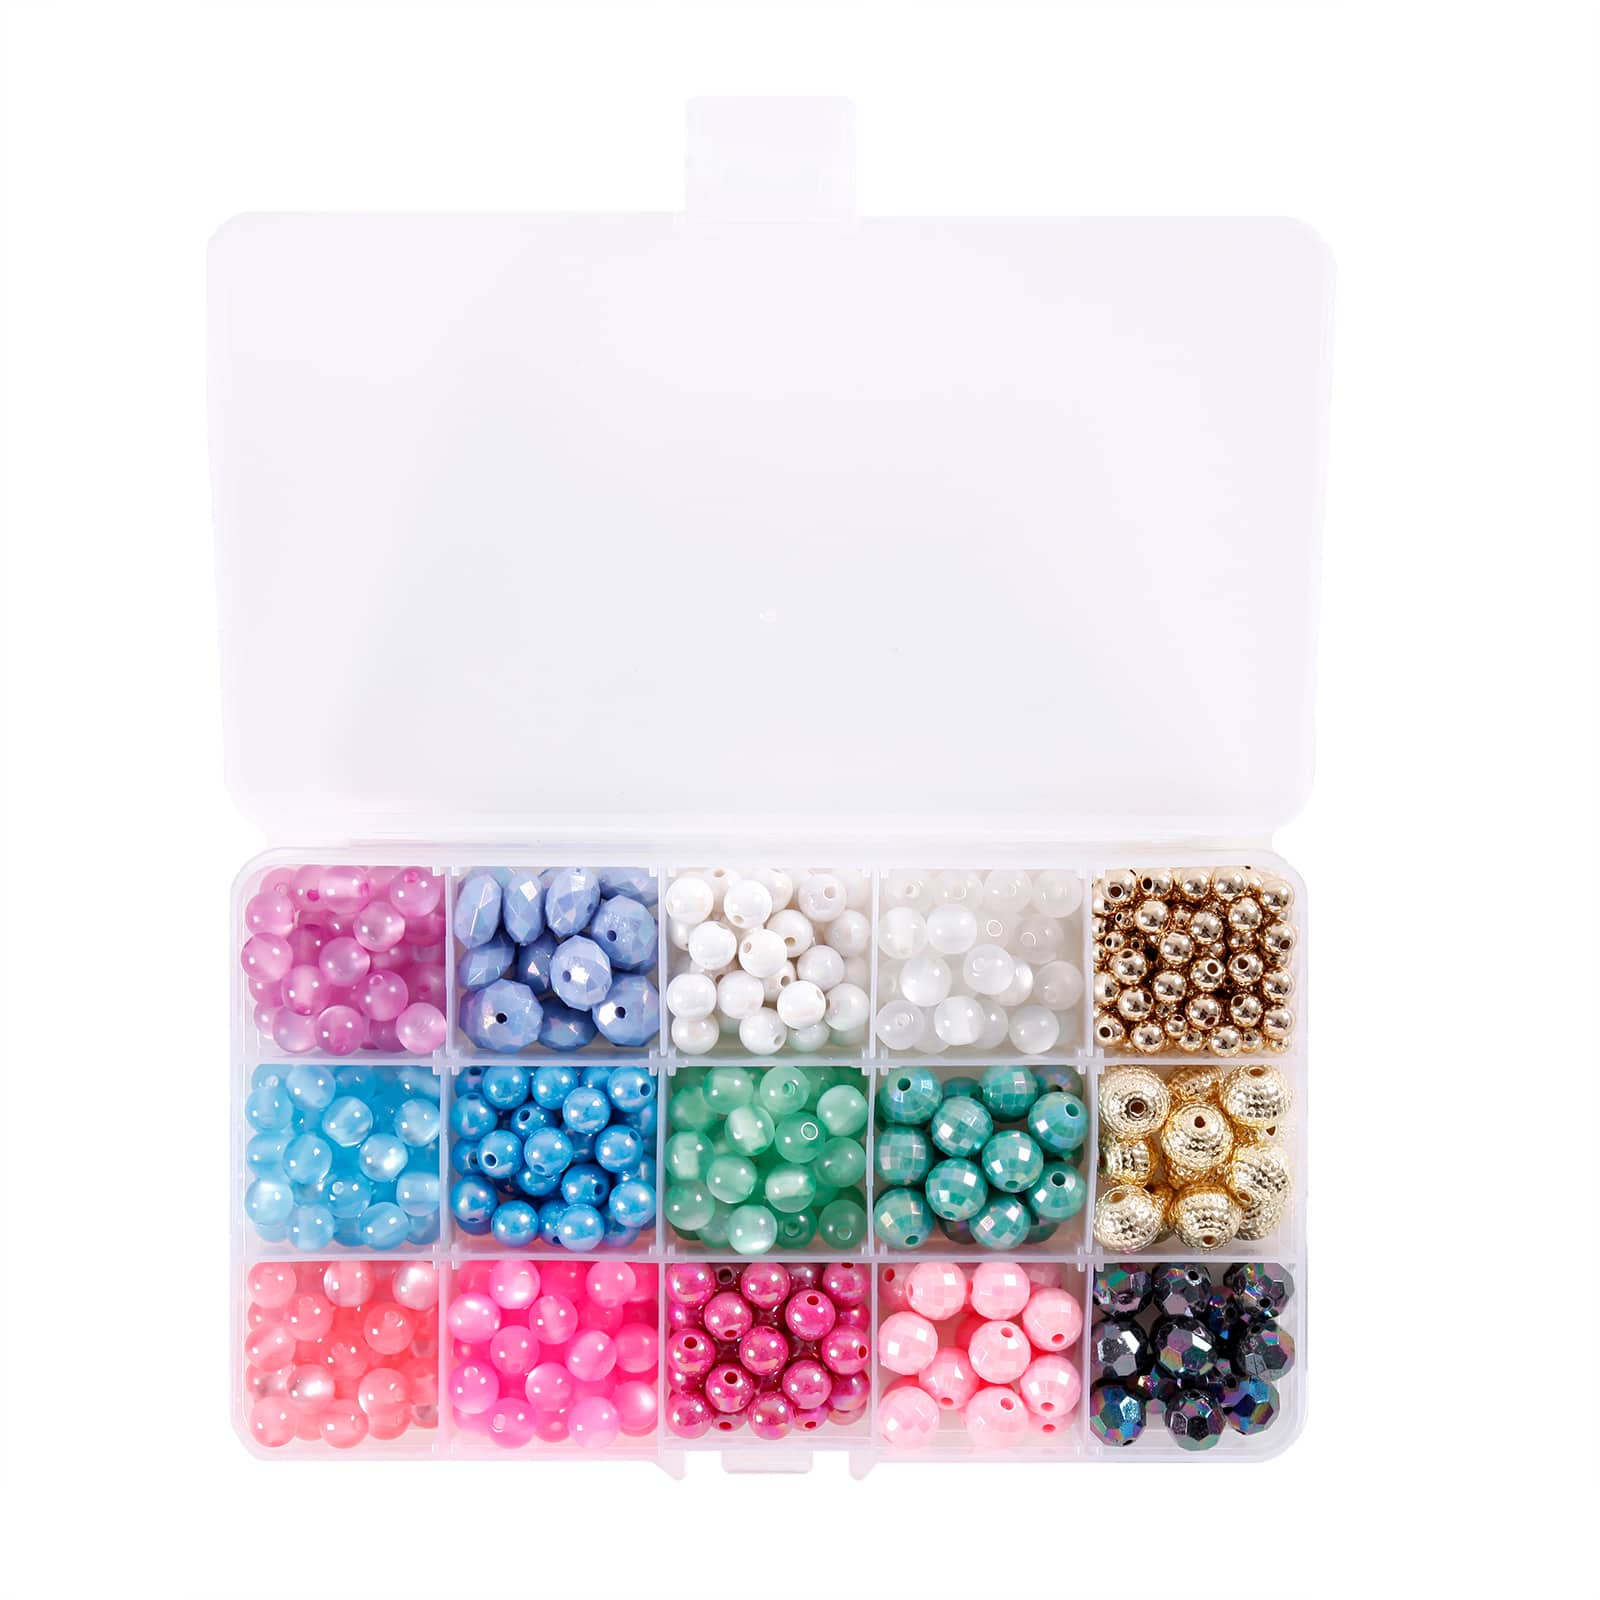 3mm Spacer Beads by Bead Landing™, Michaels